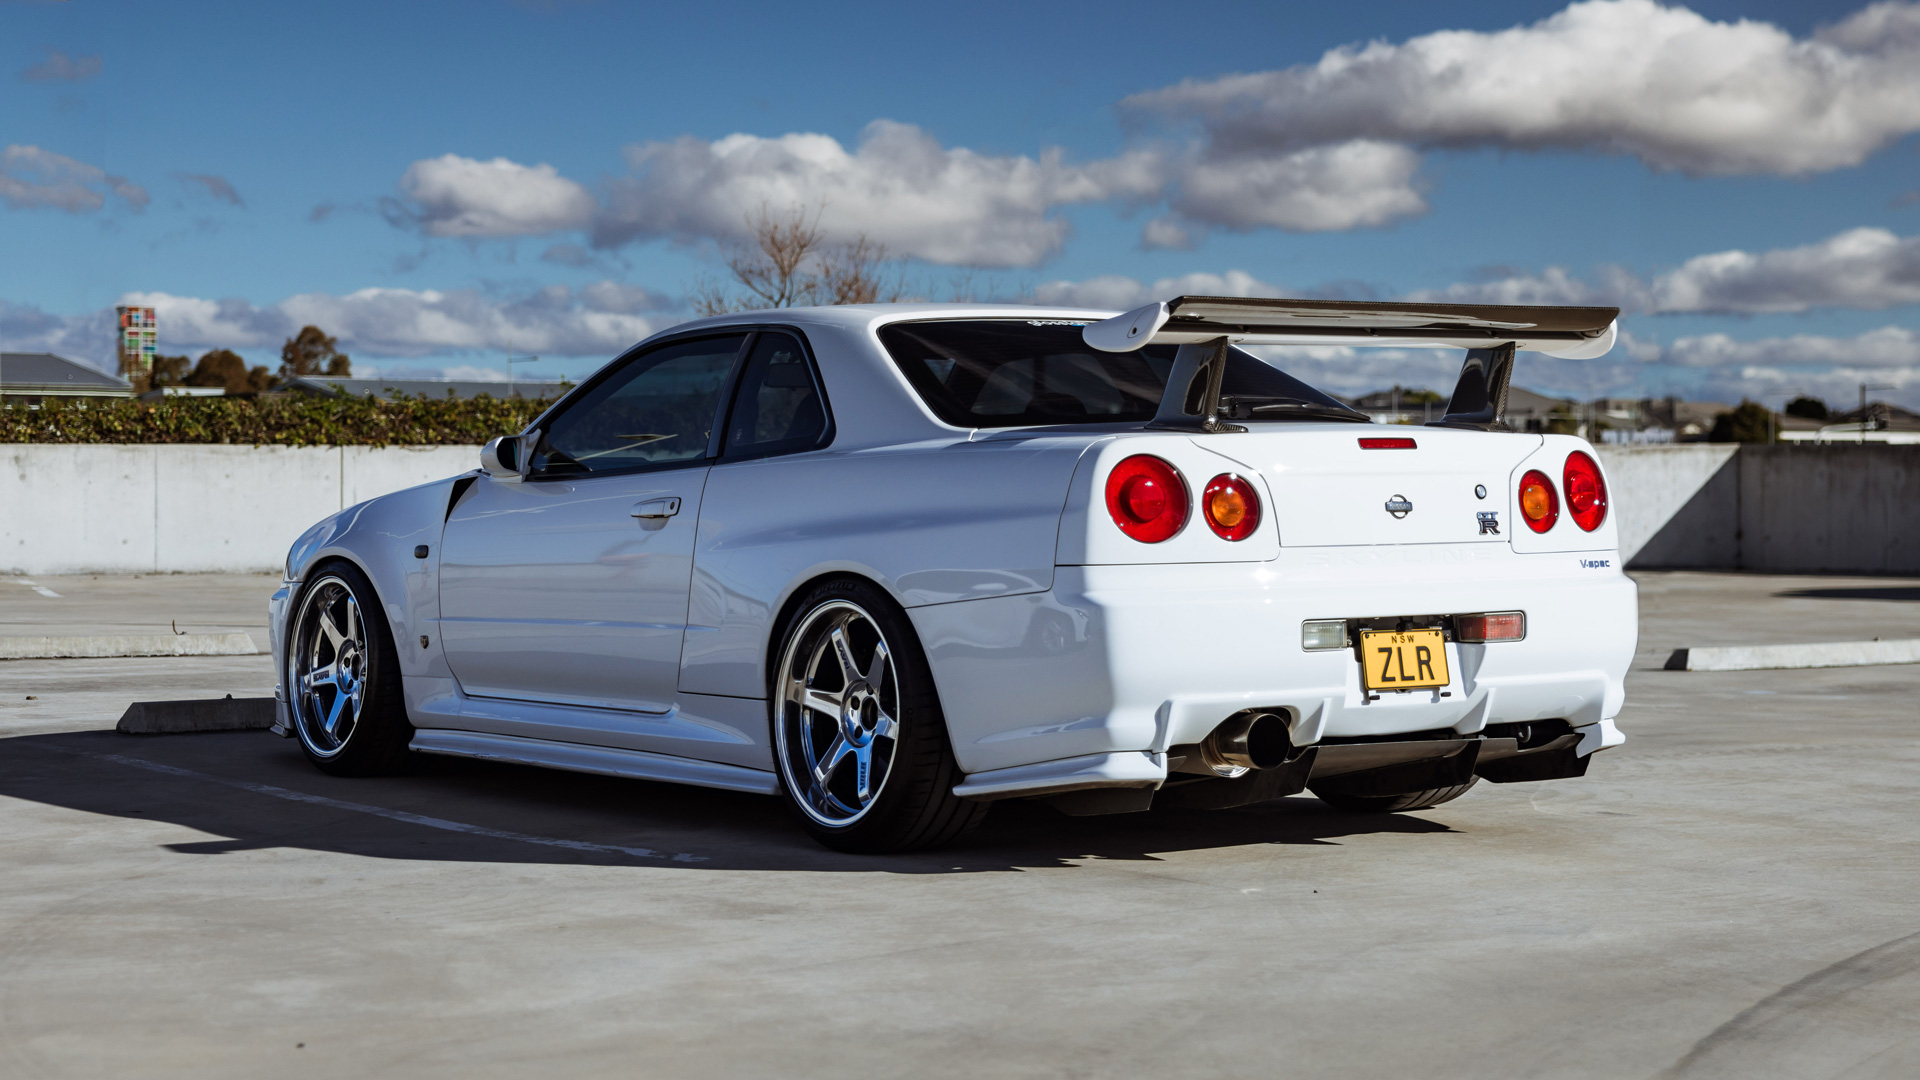 White Nissan Skyline R34 GTR looking at back with car facing left